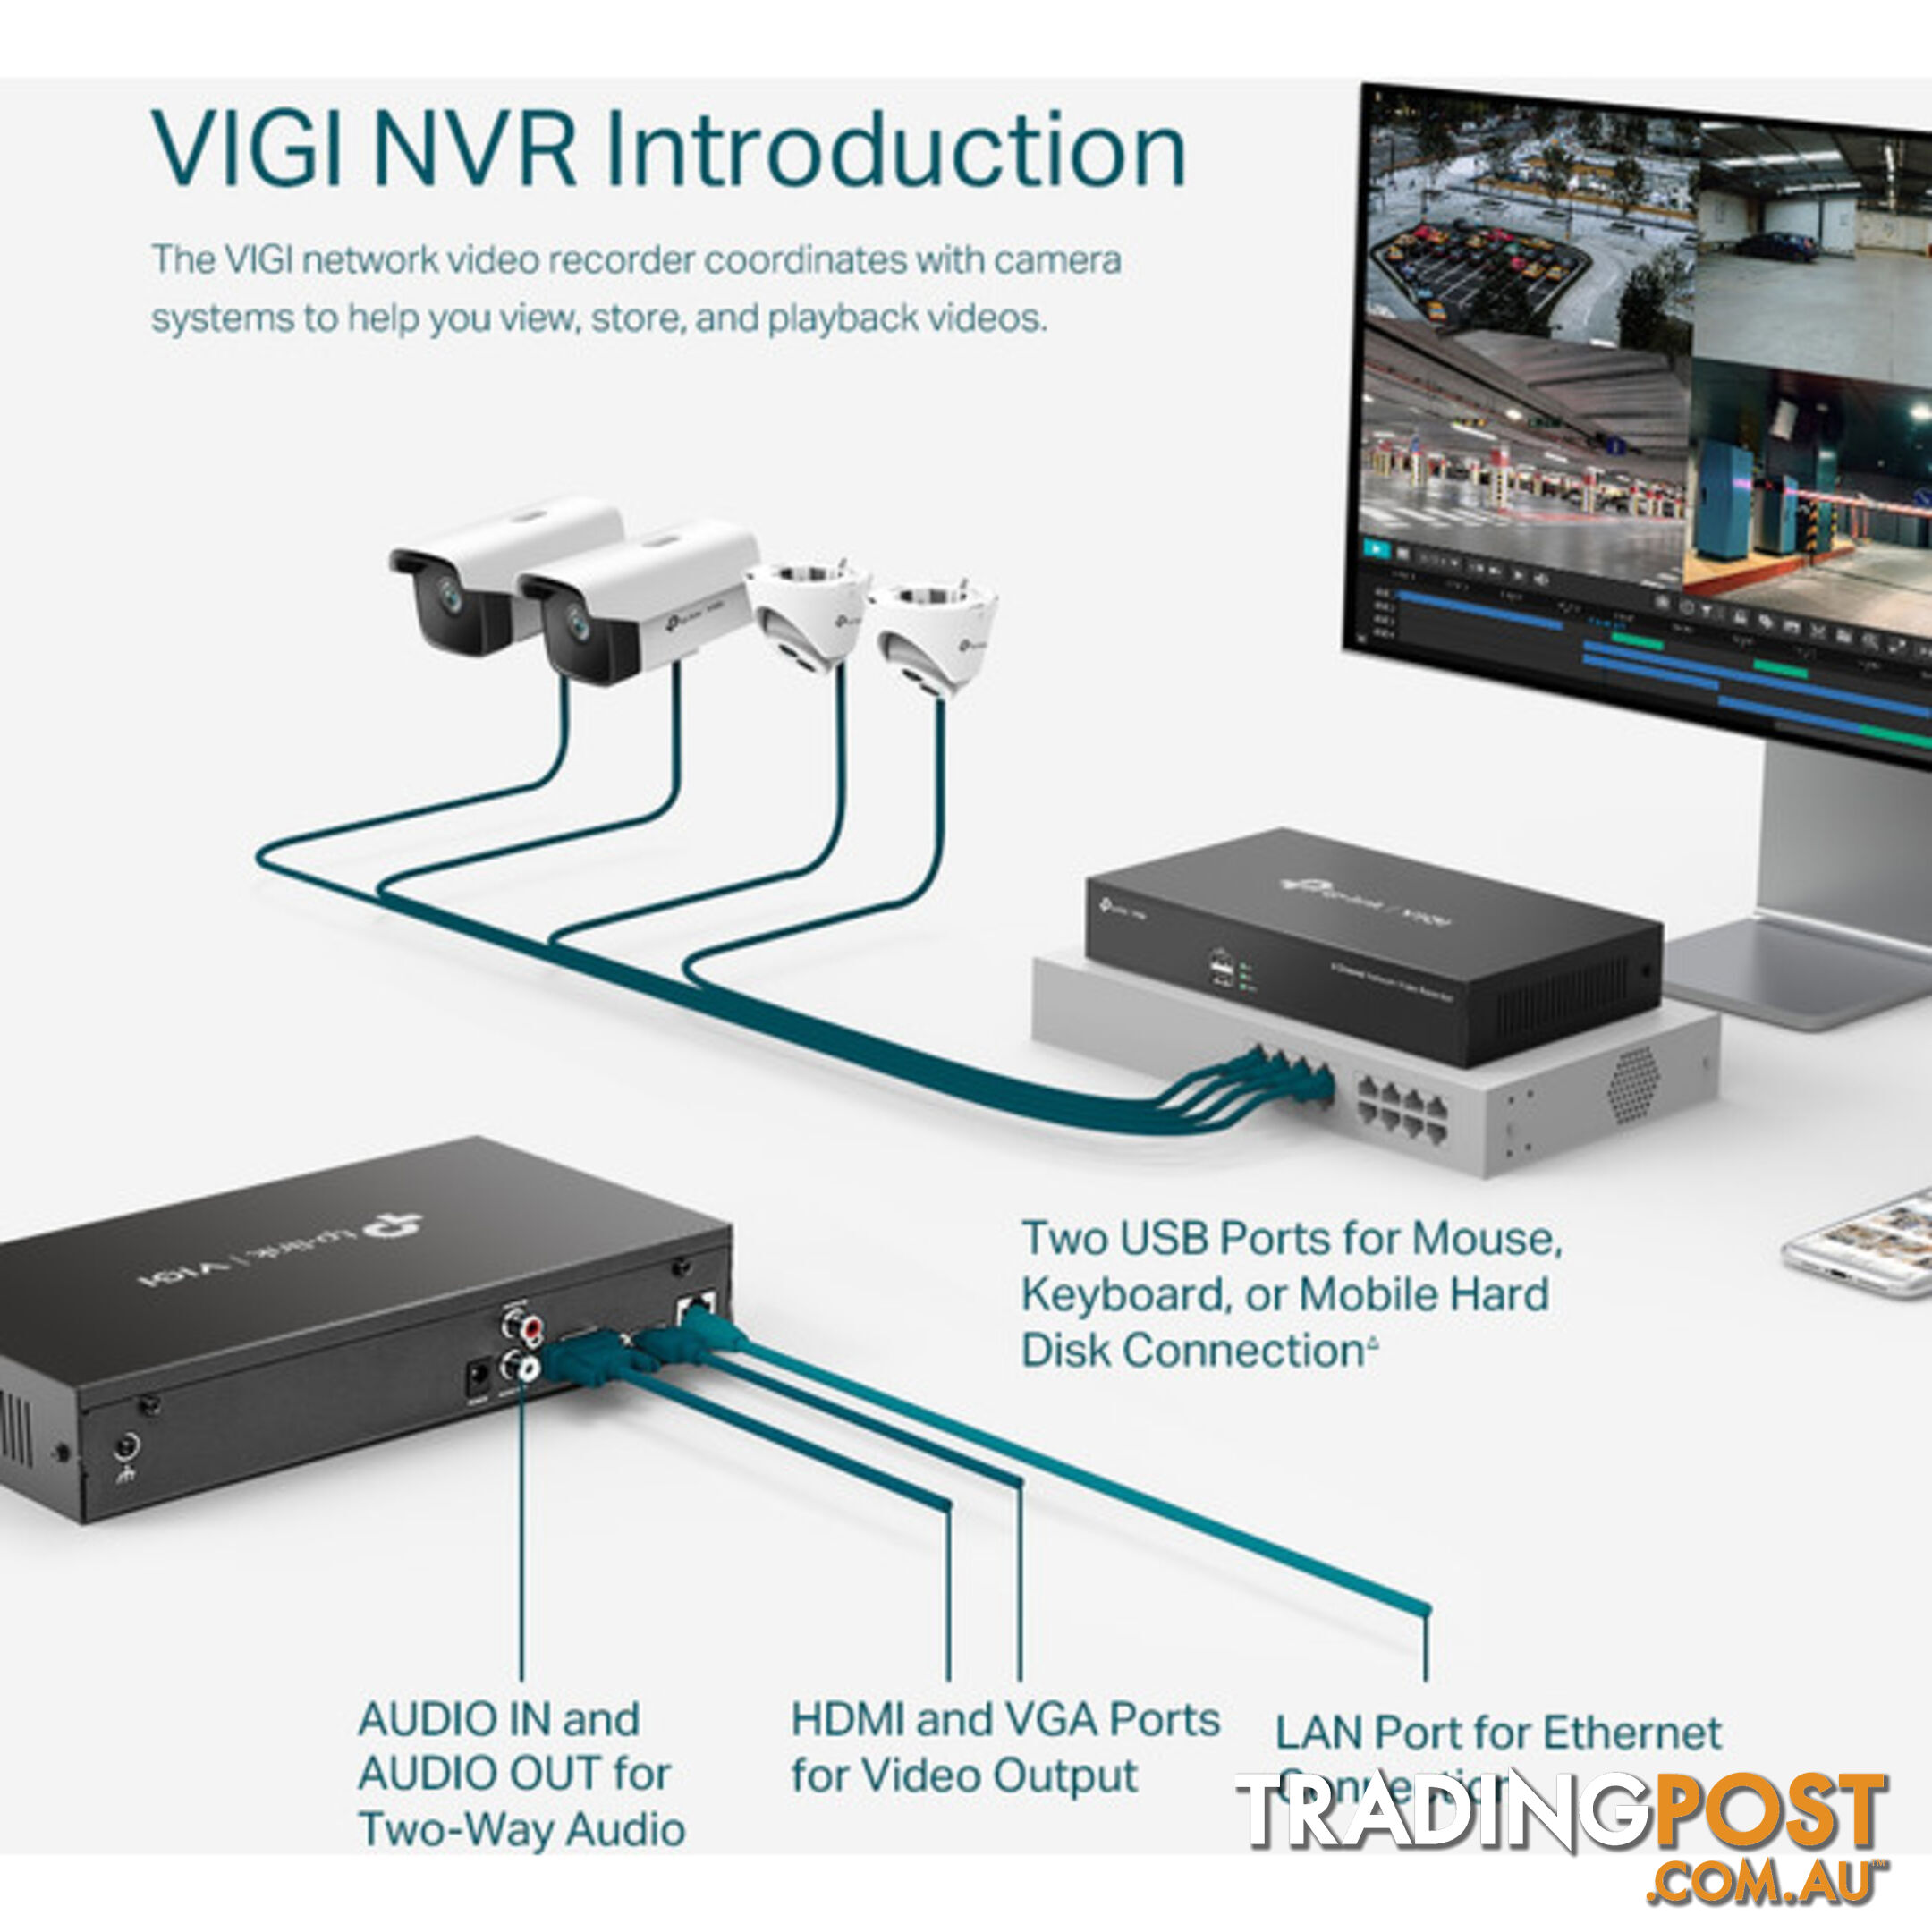 NVR1008H 8CH NETWORK VIDEO RECORDER VIGI - HDD NOT INCLUDED